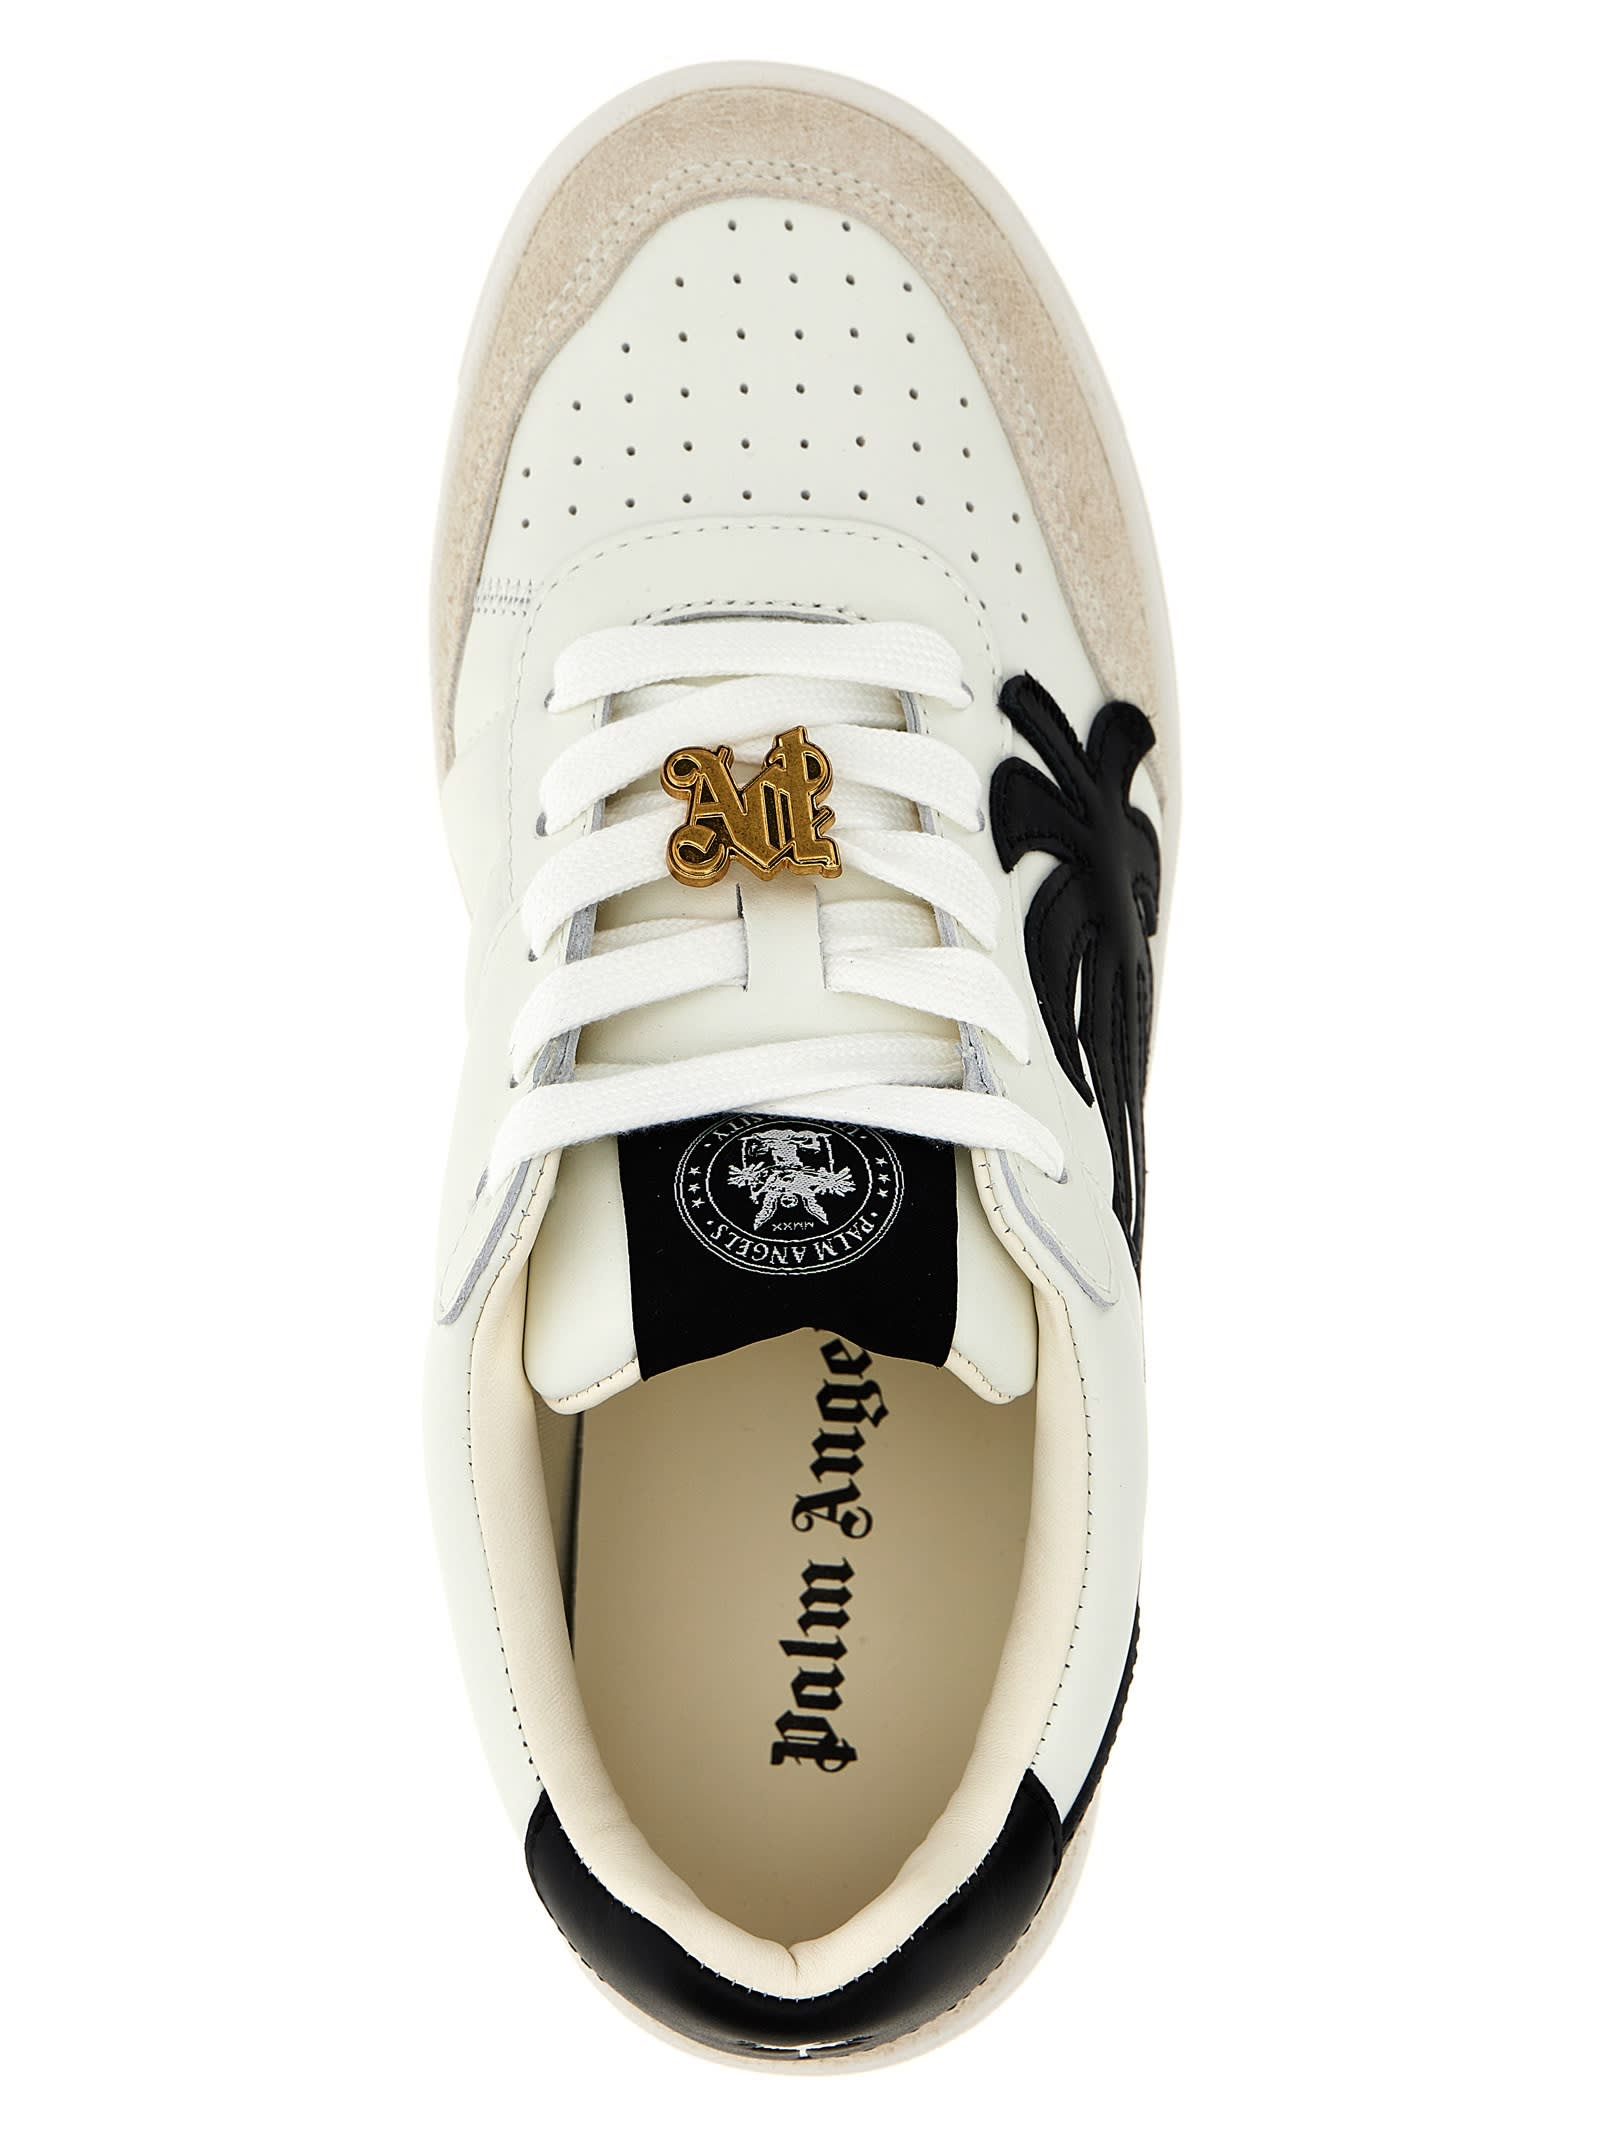 Shop Palm Angels Palm Beach University Sneakers In White/black